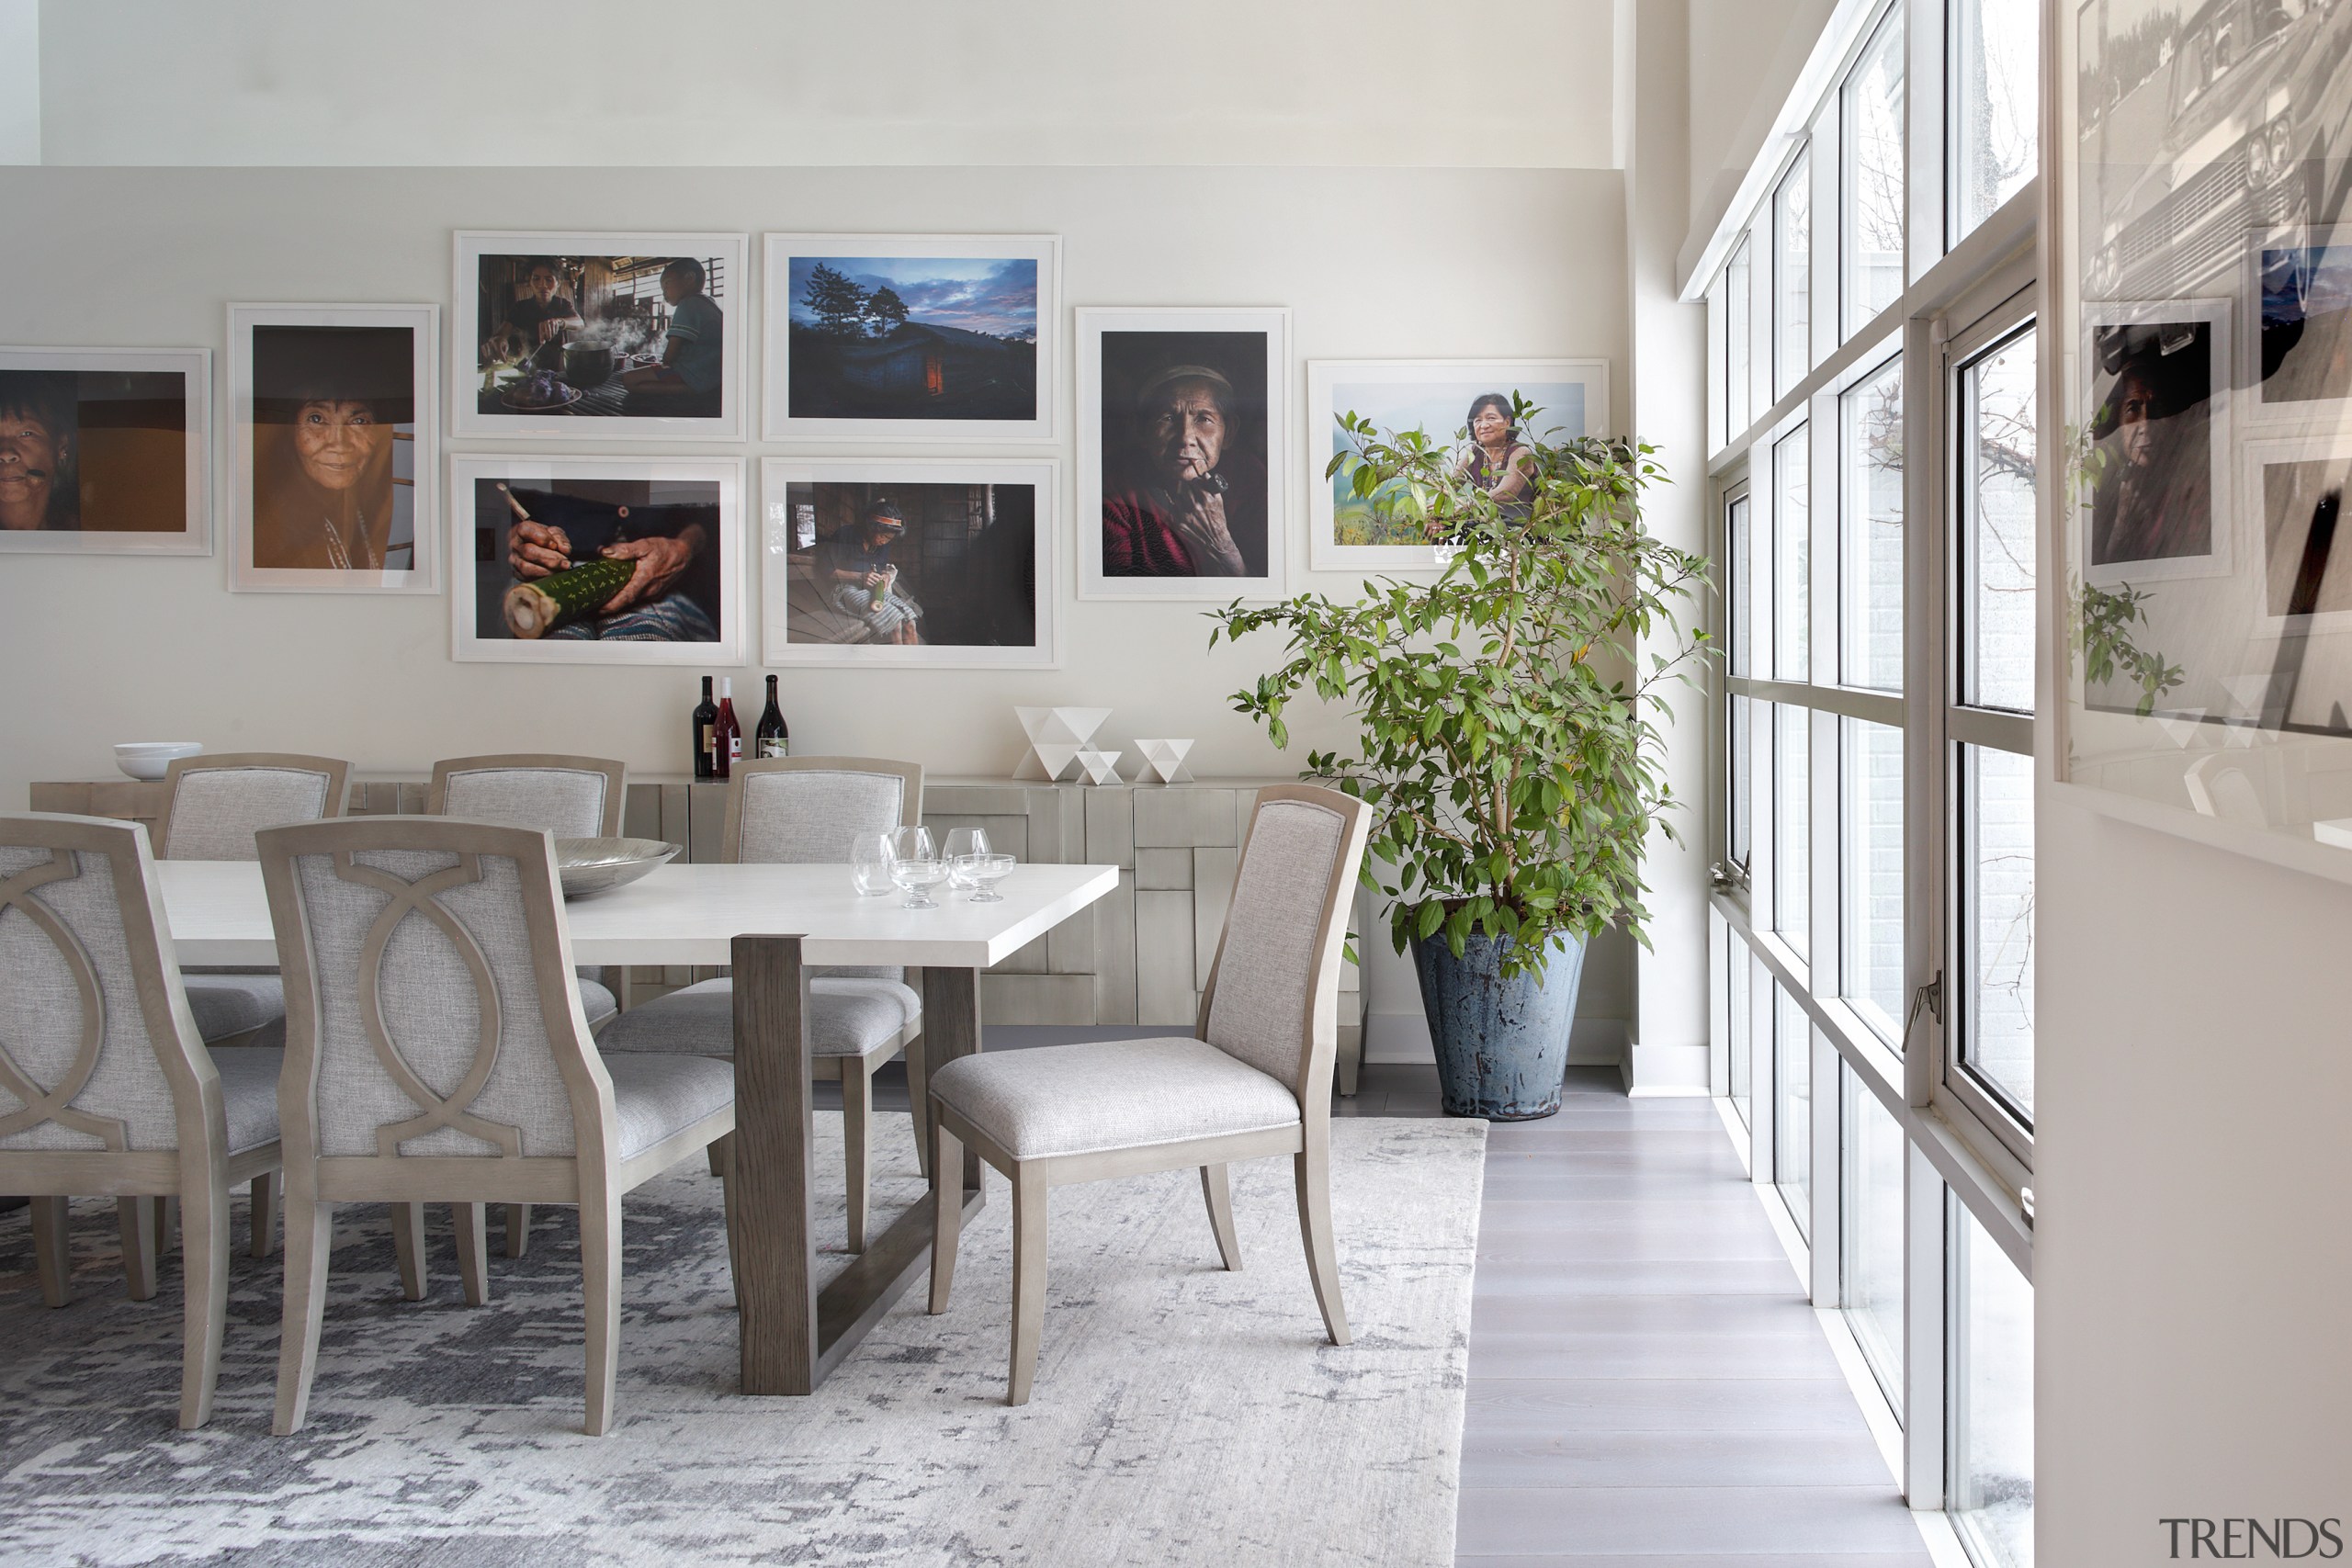 The pale-toned dining area is injected with pops 